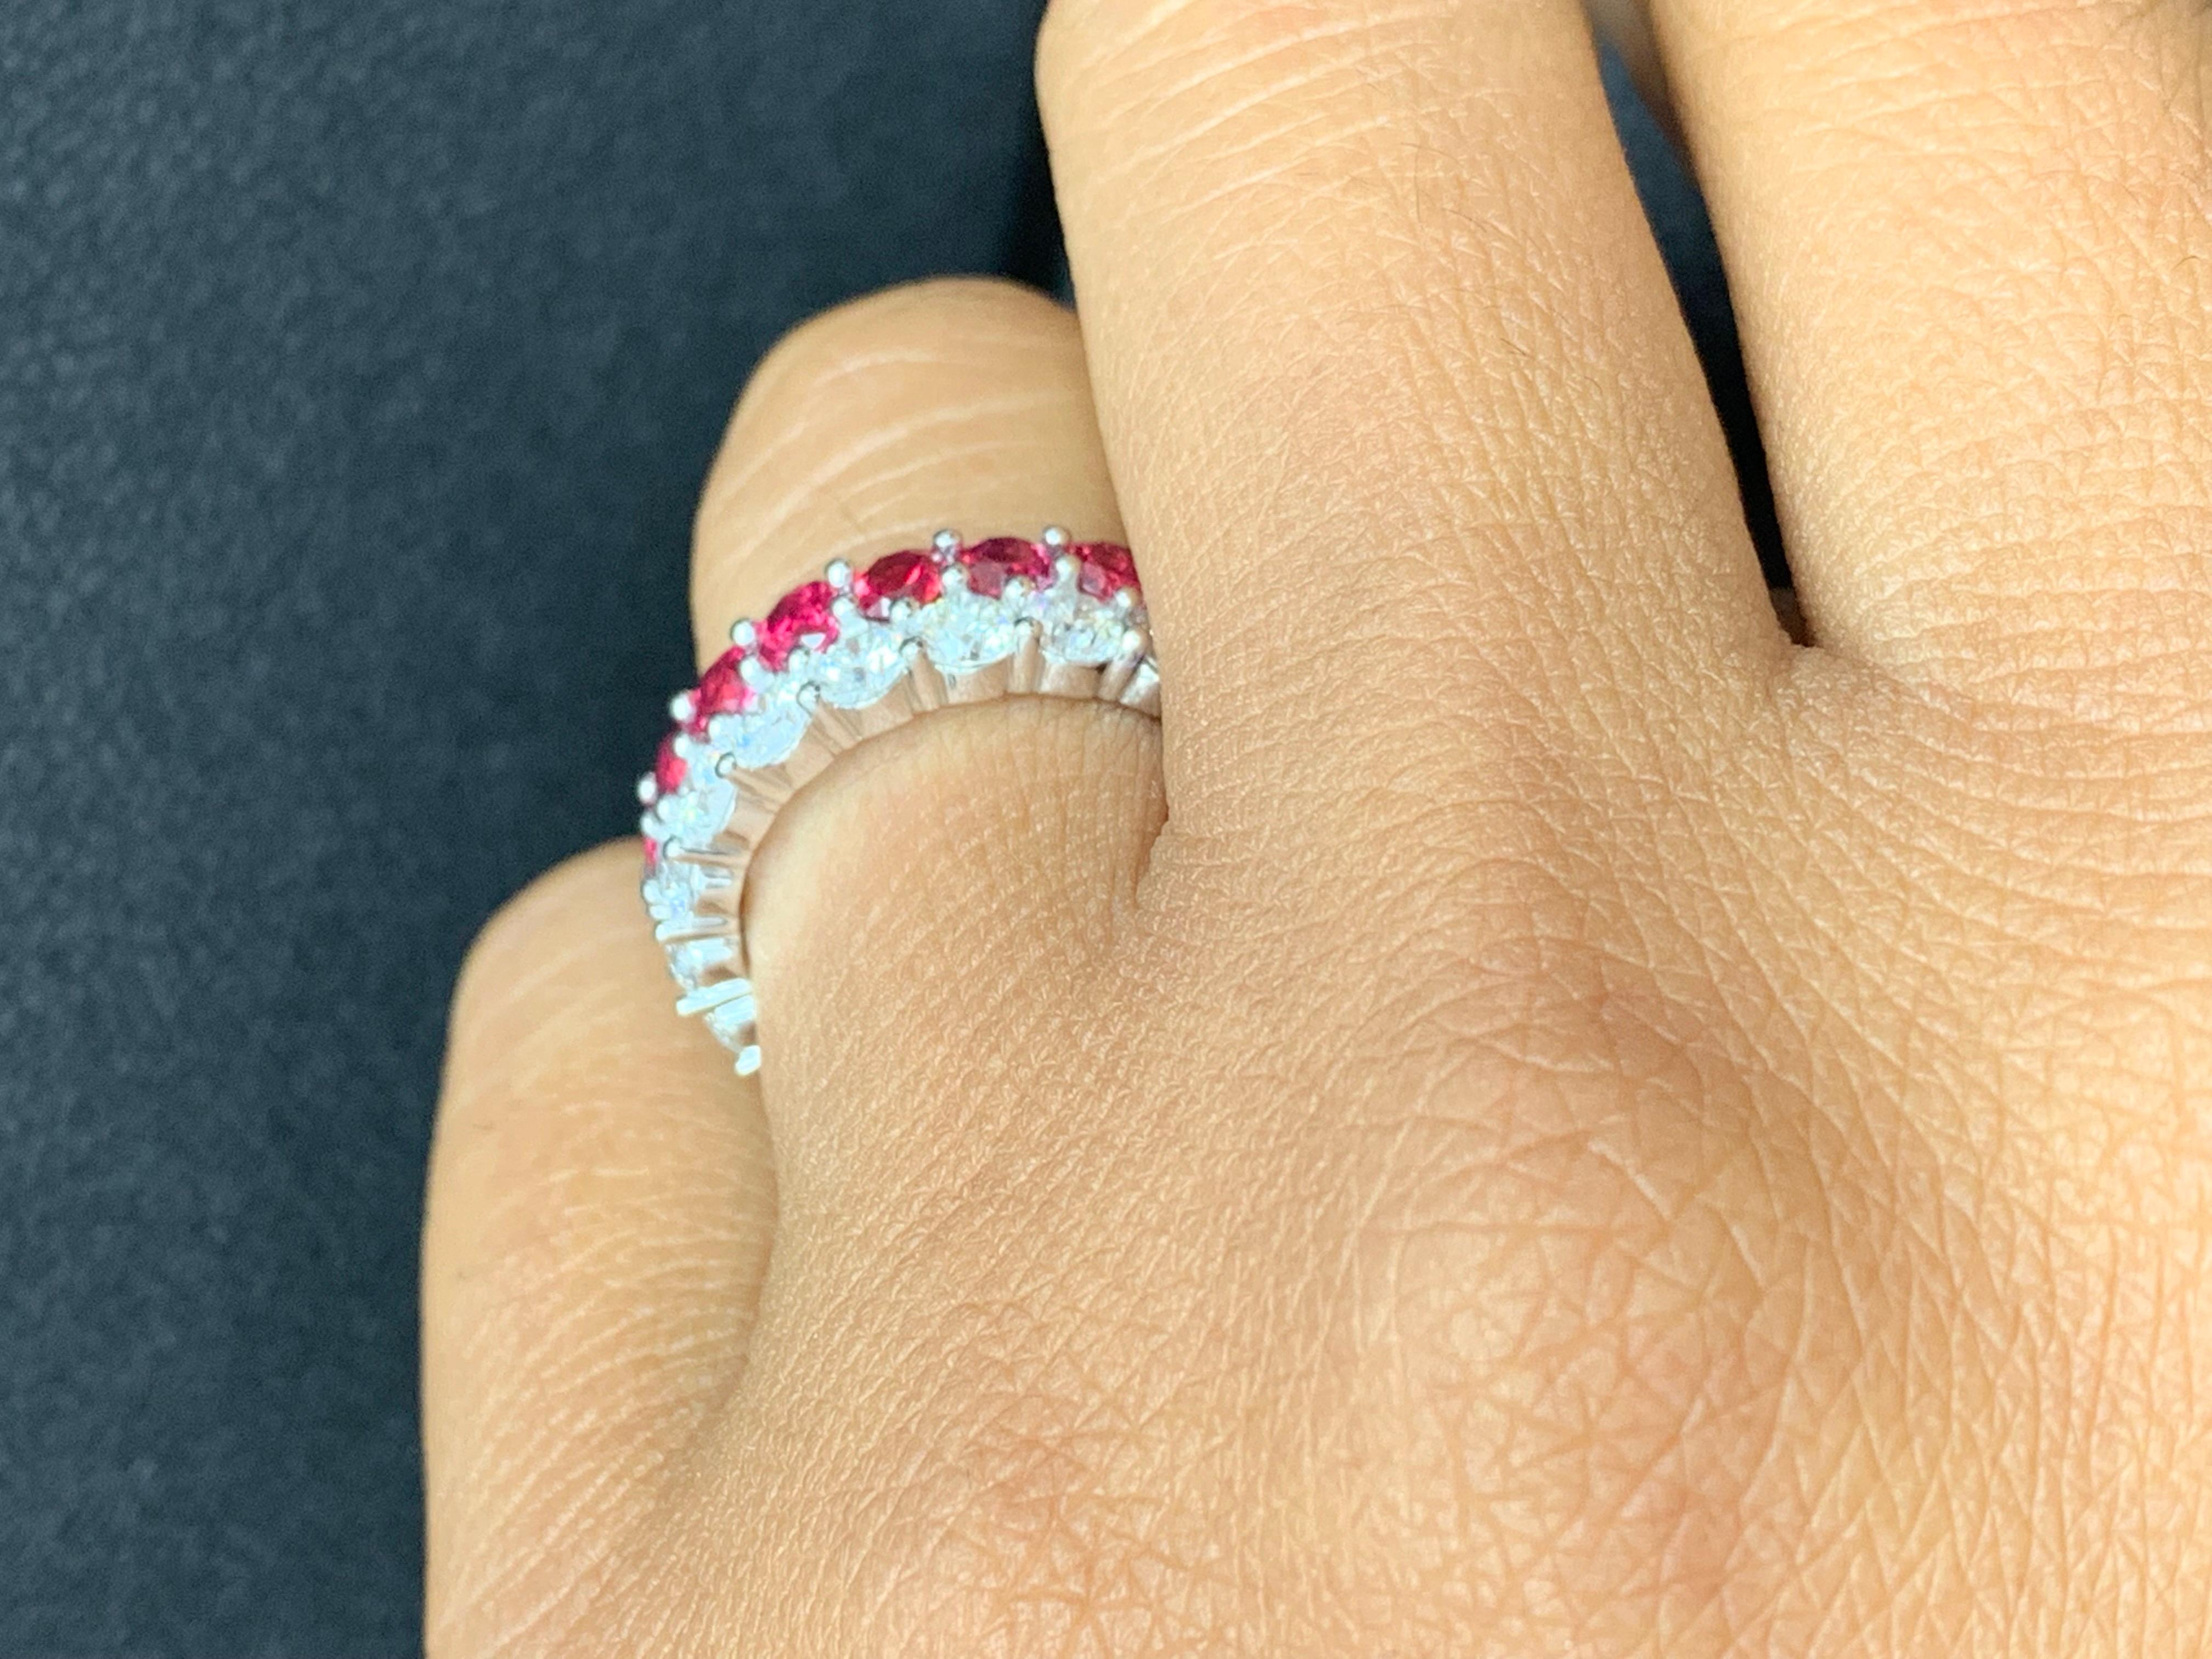 A unique and fashionable ring showcasing two rows of round-shape 9 rubies and 10 diamonds, set in a band design. Rubies weigh 1.66 carats and Diamonds weigh 1.49 carats total. A brilliant and masterfully-made piece.

Style available in different